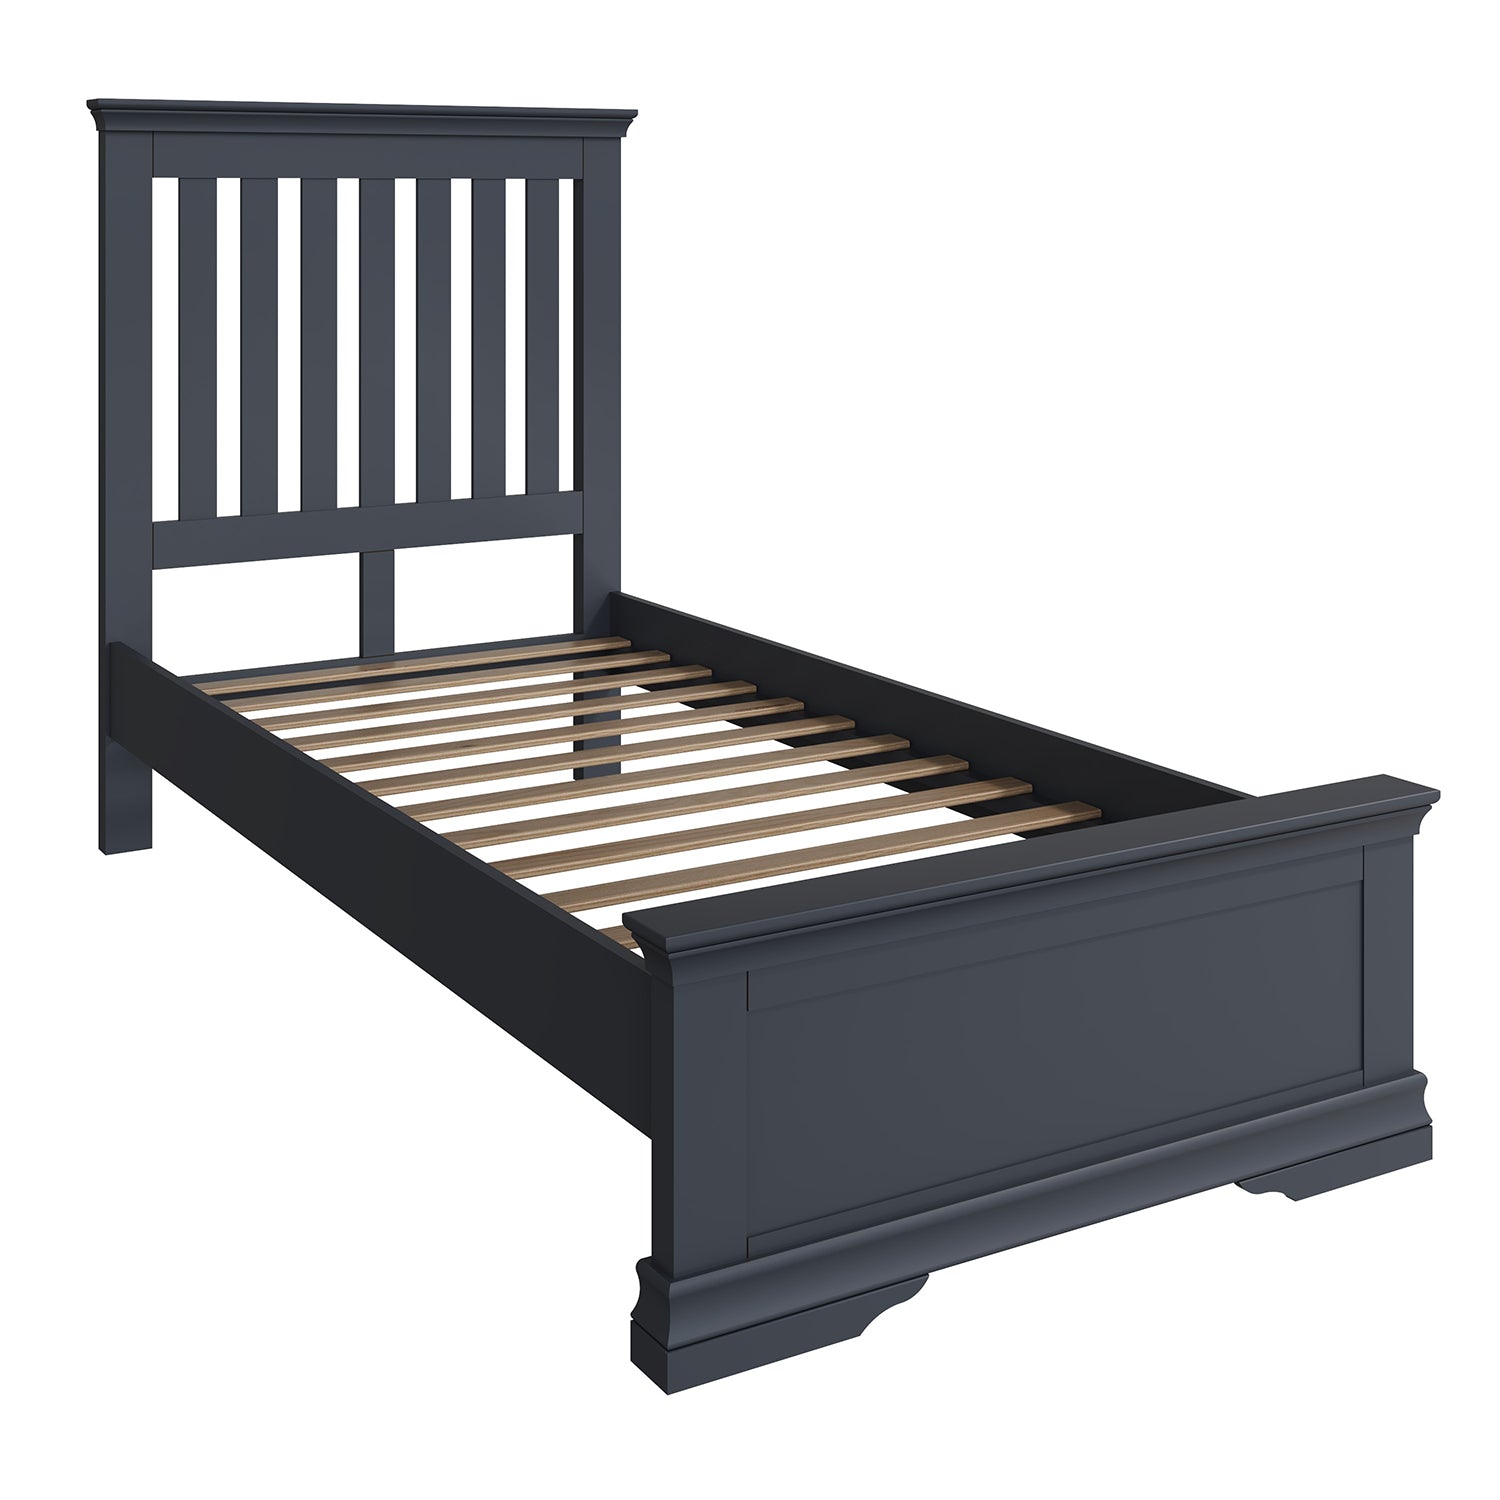 Toulouse Charcoal Bed - 3ft